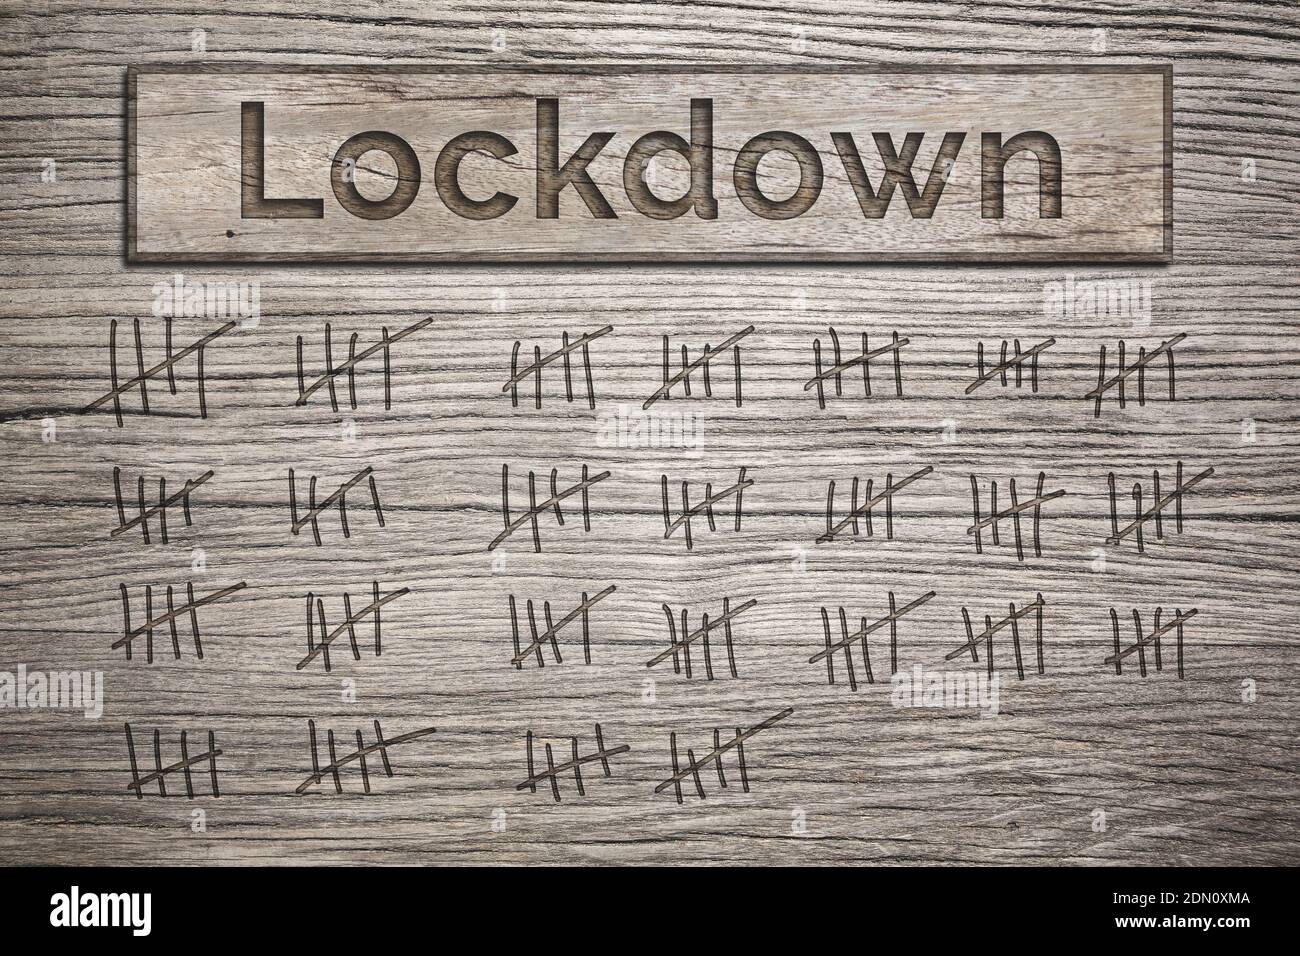 Lockdown duration count - markings on wood Stock Photo